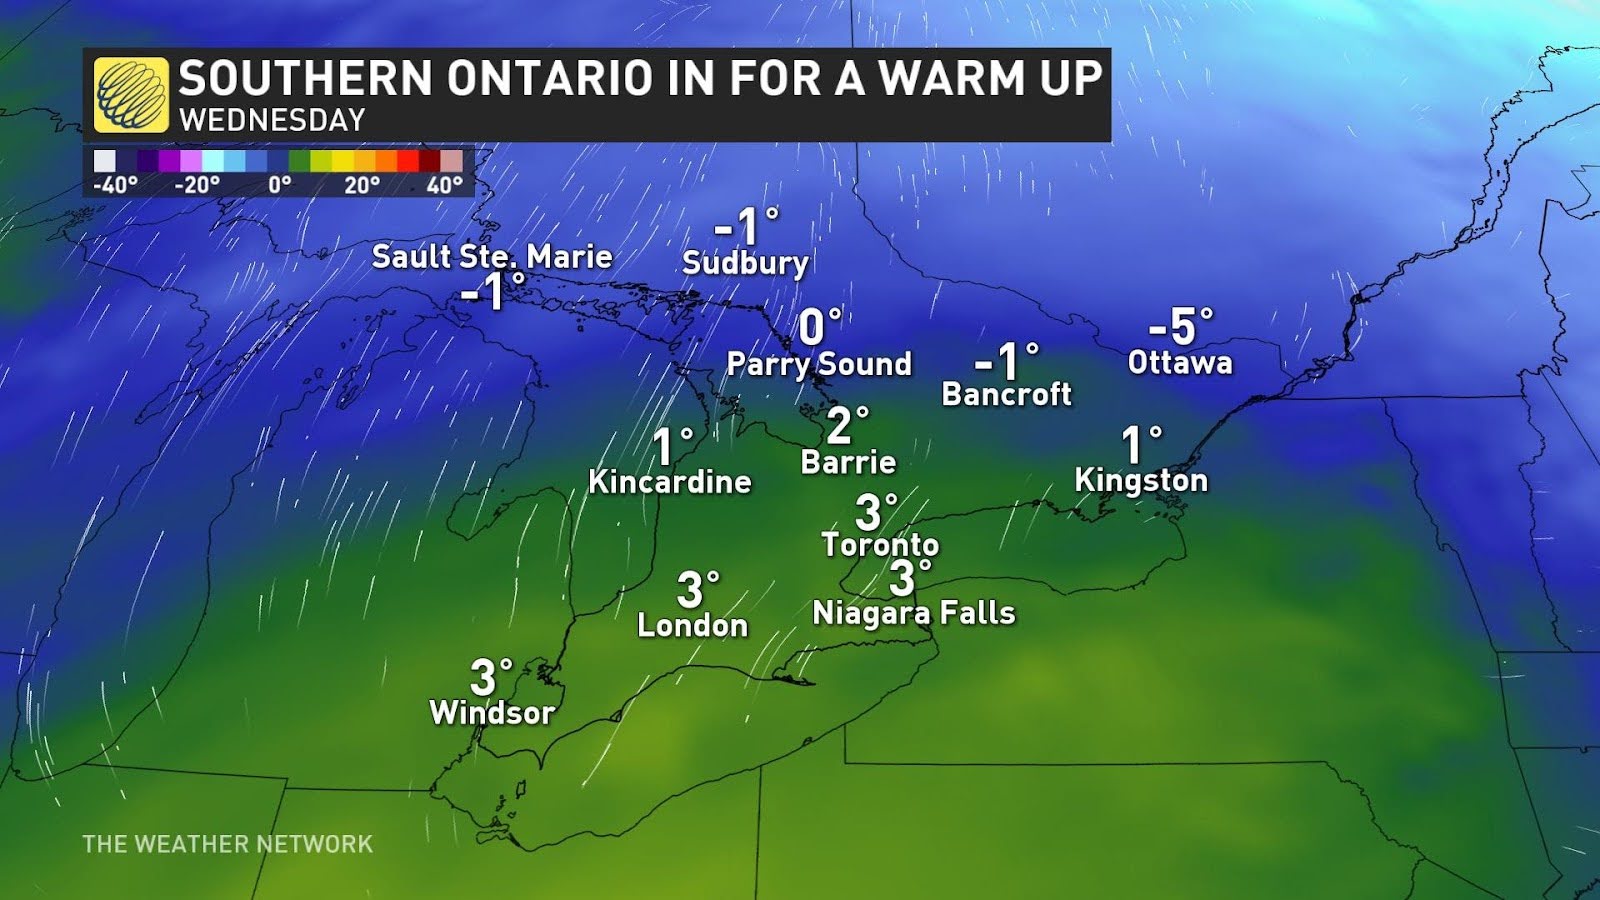 ready for a warm-up, canada? you’ll love next week’s forecast